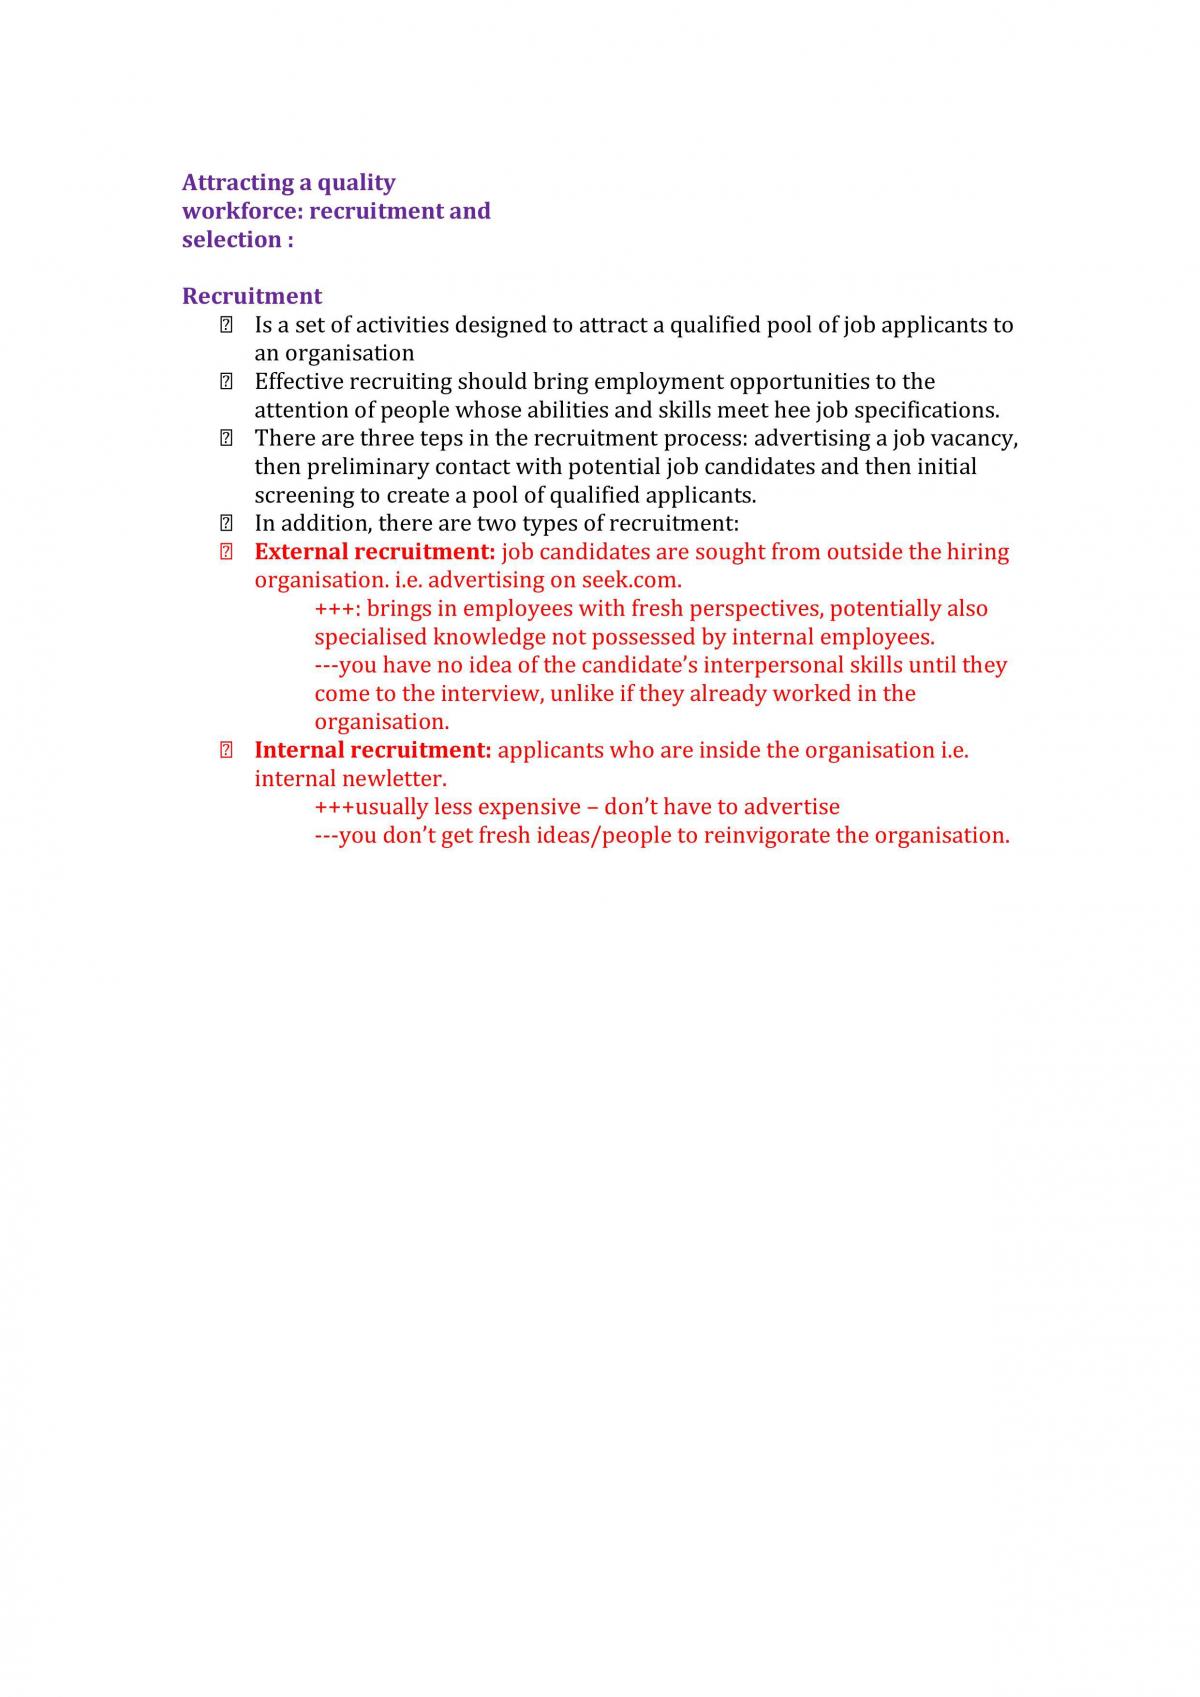 MGC1010 - Introduction to Management  - Page 28